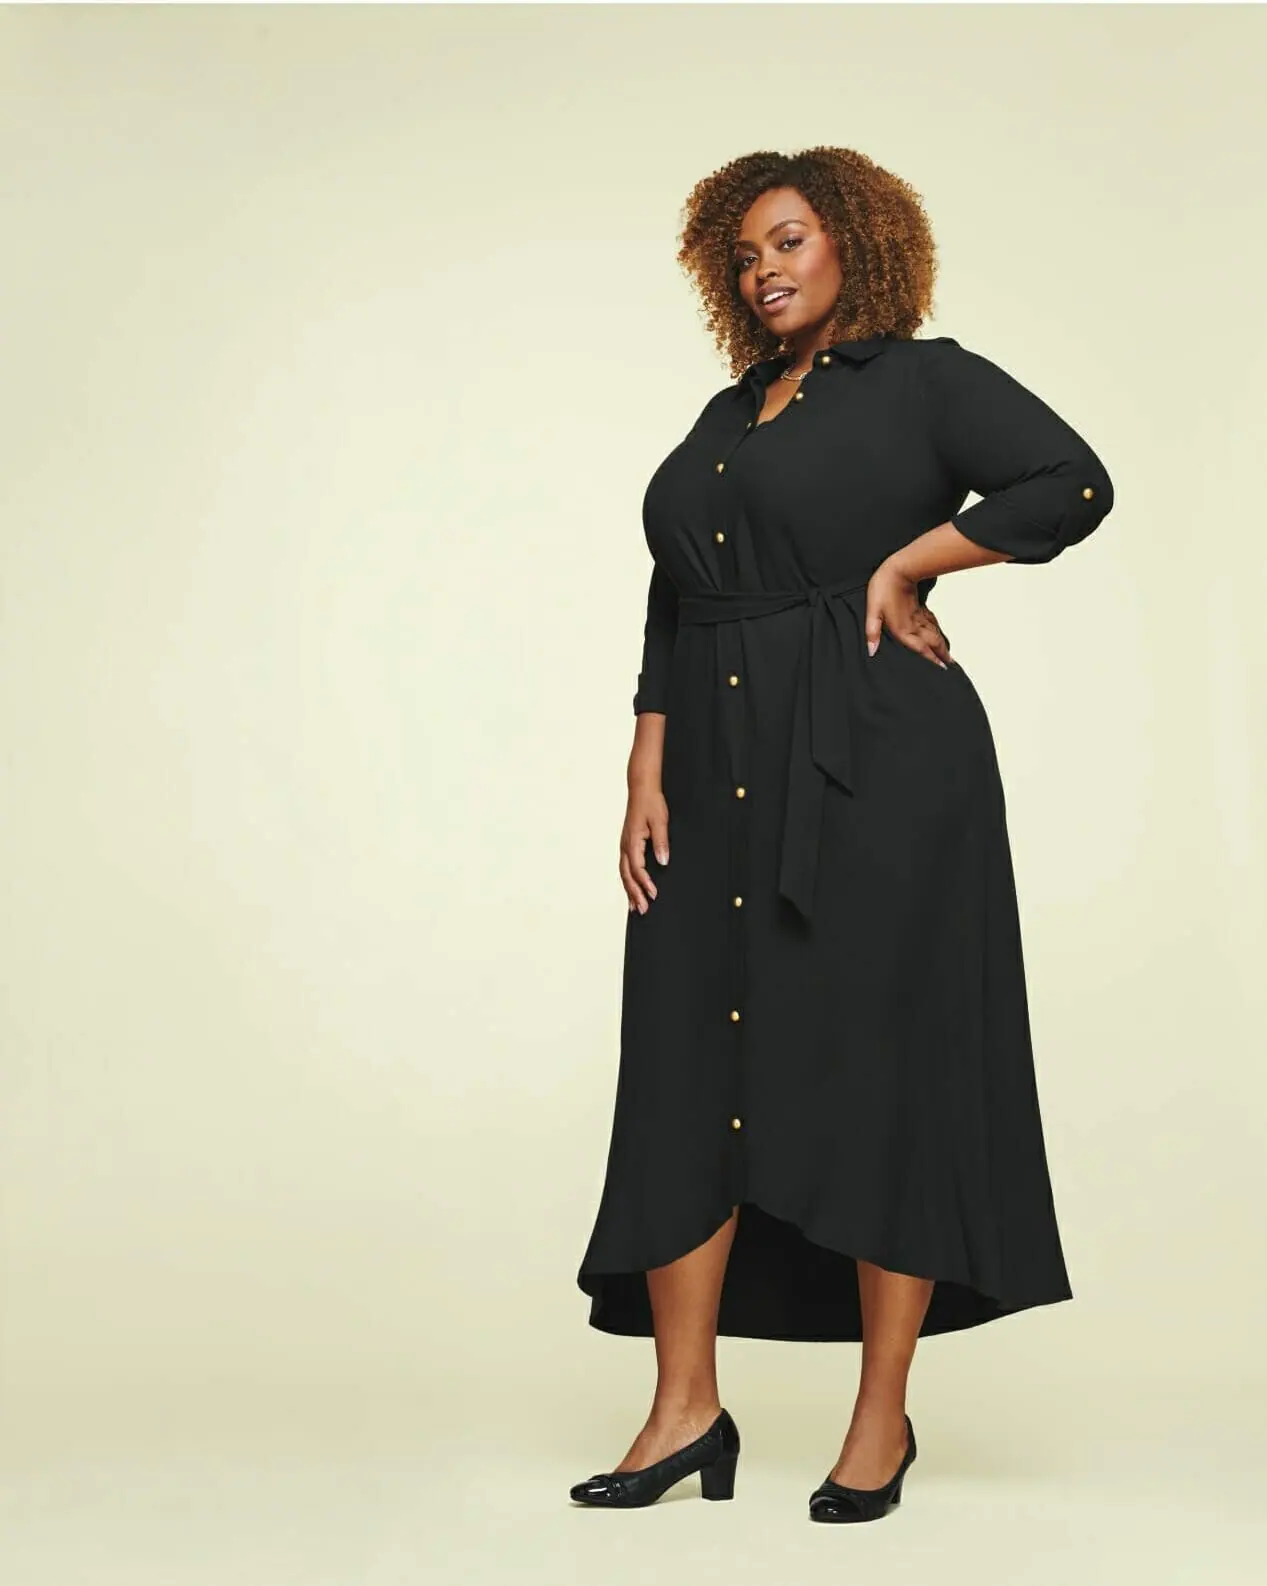 Plus Size Casual Top Plus Size Clothing Curvy Fashion Comfortable and Sexy Plus  Size Tops 1X 2X 3X 4X 5X 